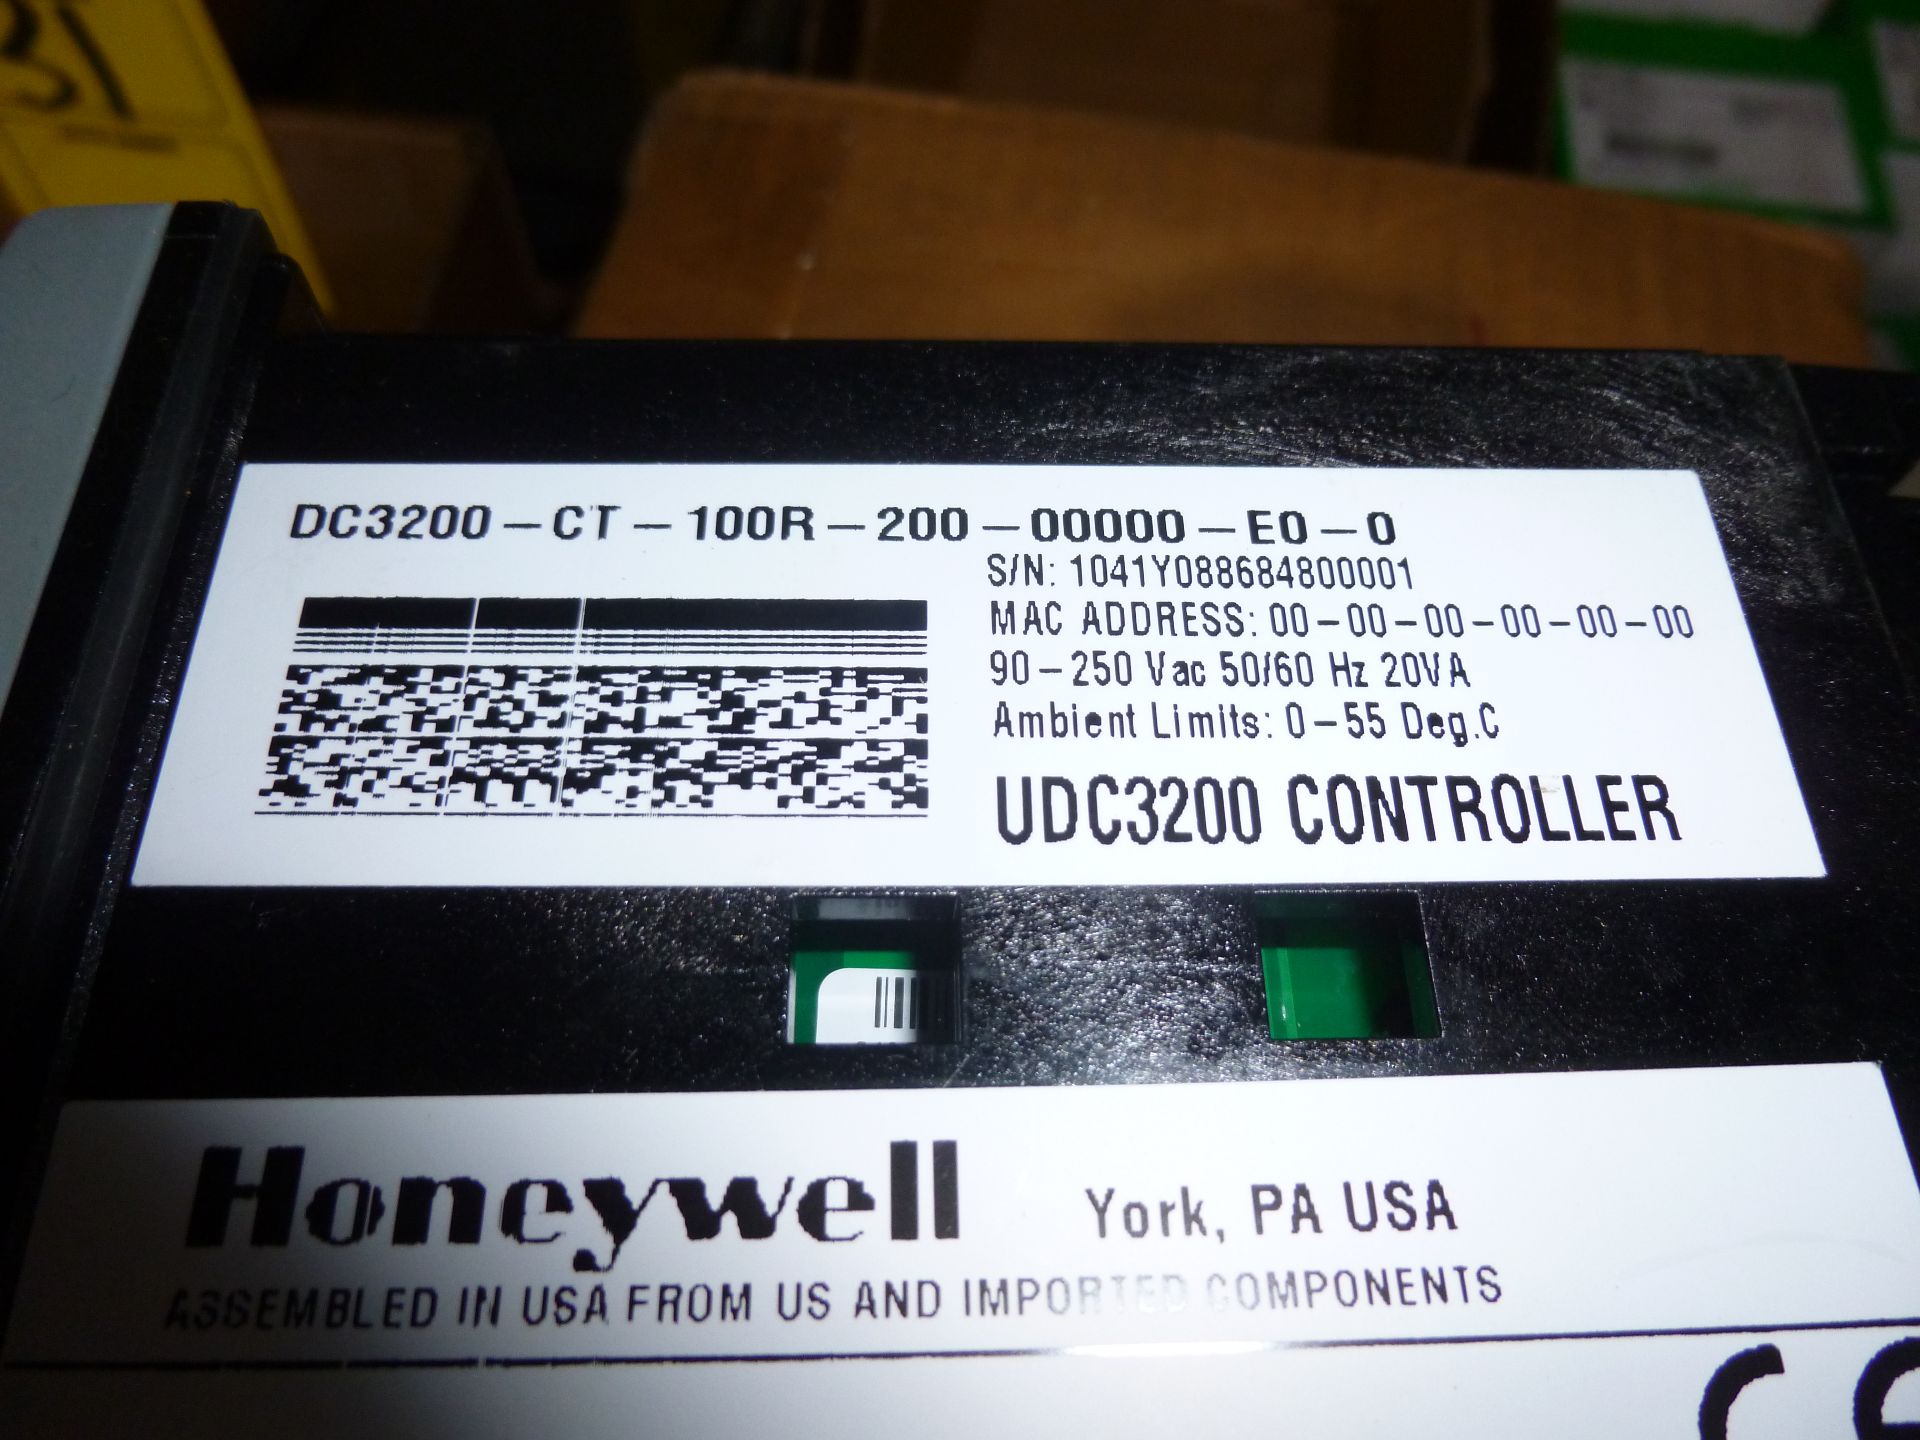 Honeywell controller DC3200-CT-100R-200-00000-E0-0, appears new without box, as always with Brolyn - Image 2 of 2